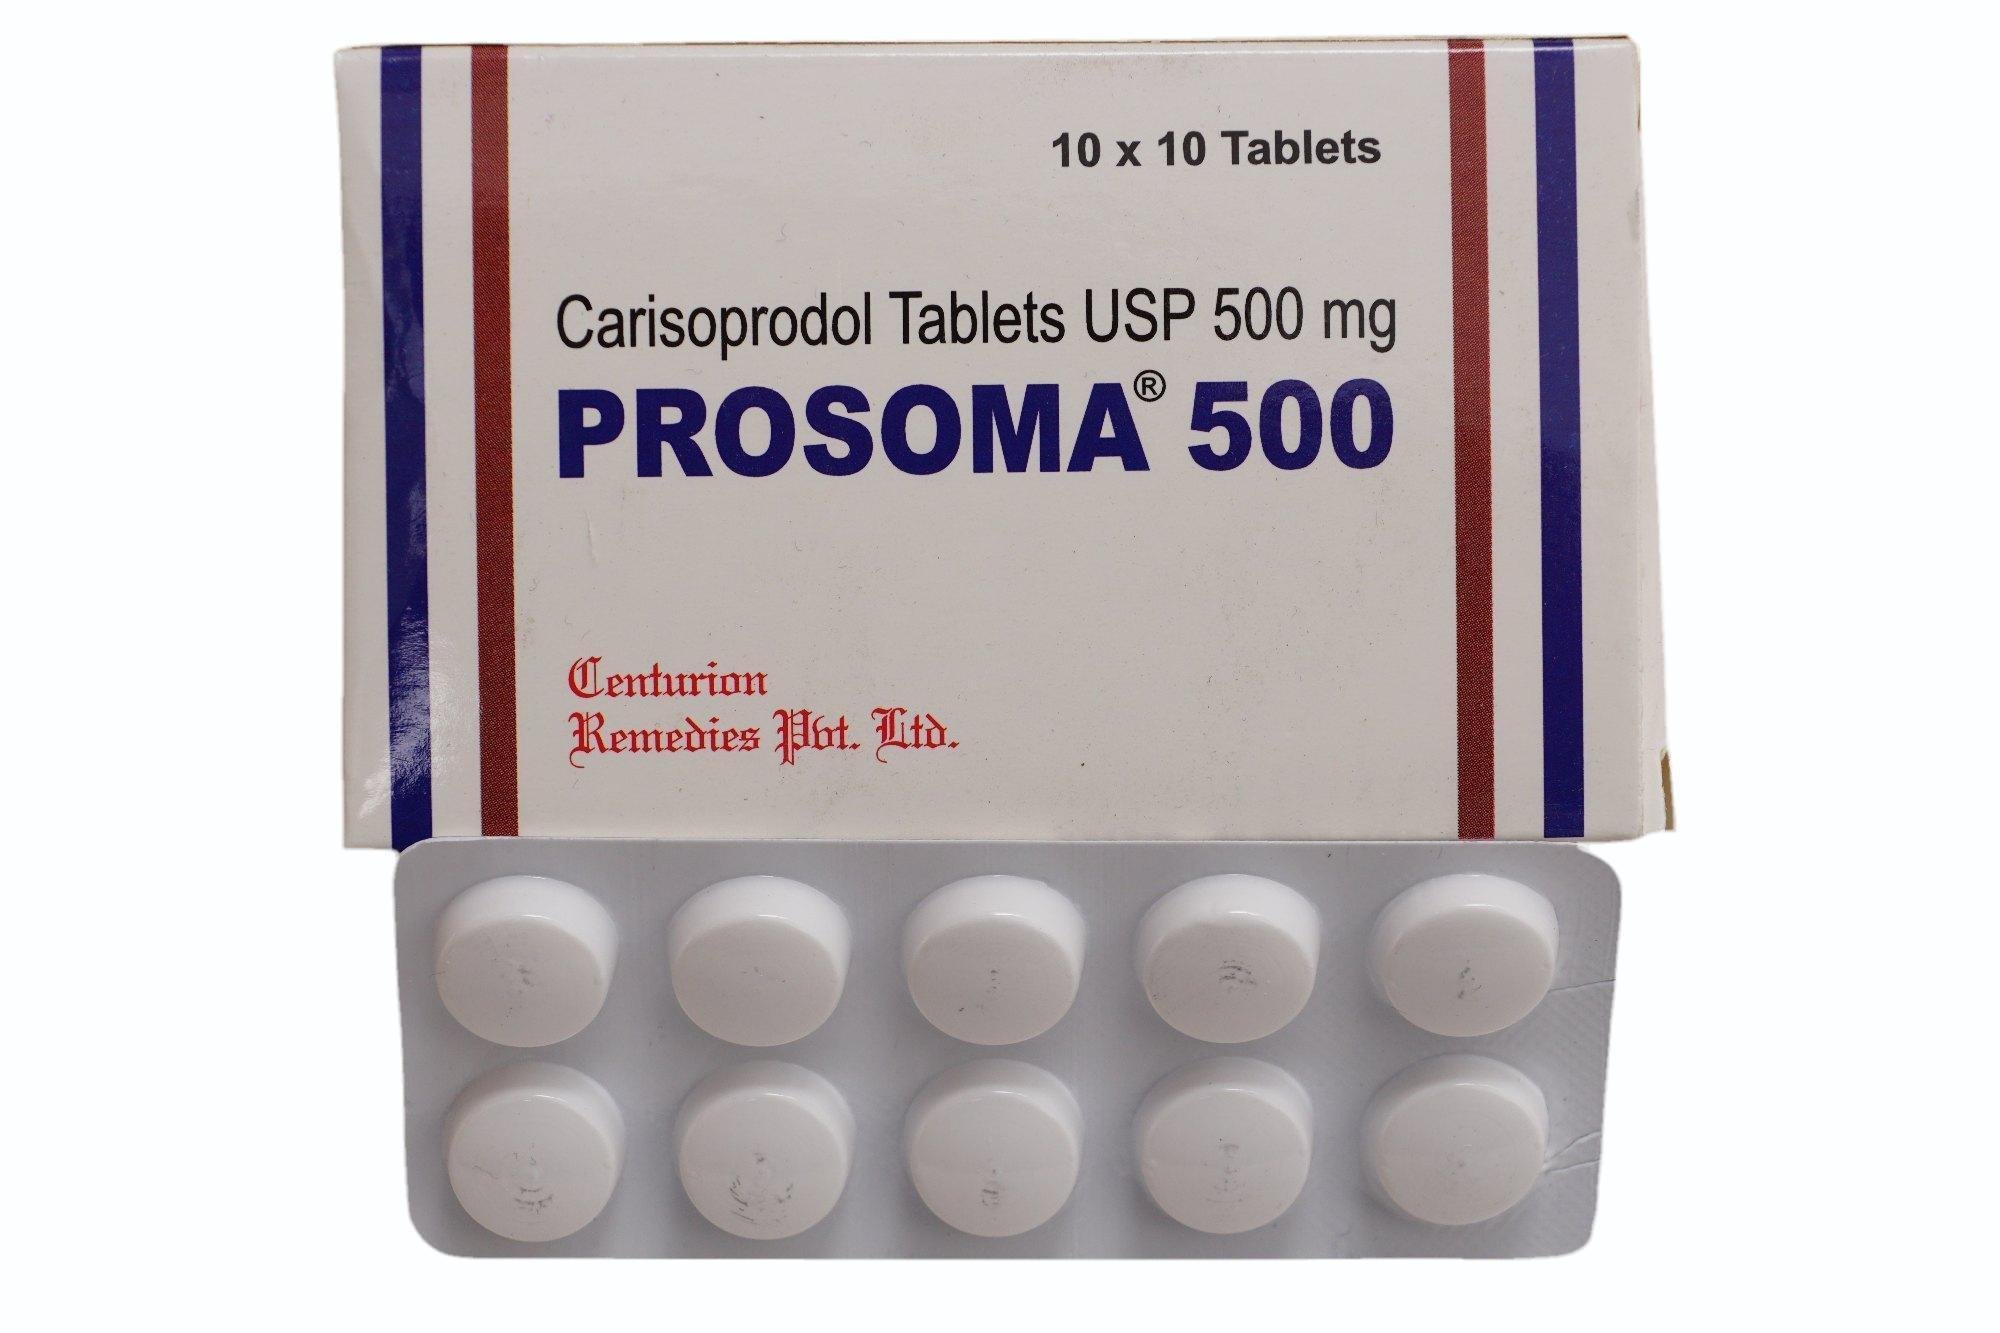 How does Prosoma 500mg compare to other muscle relaxants?